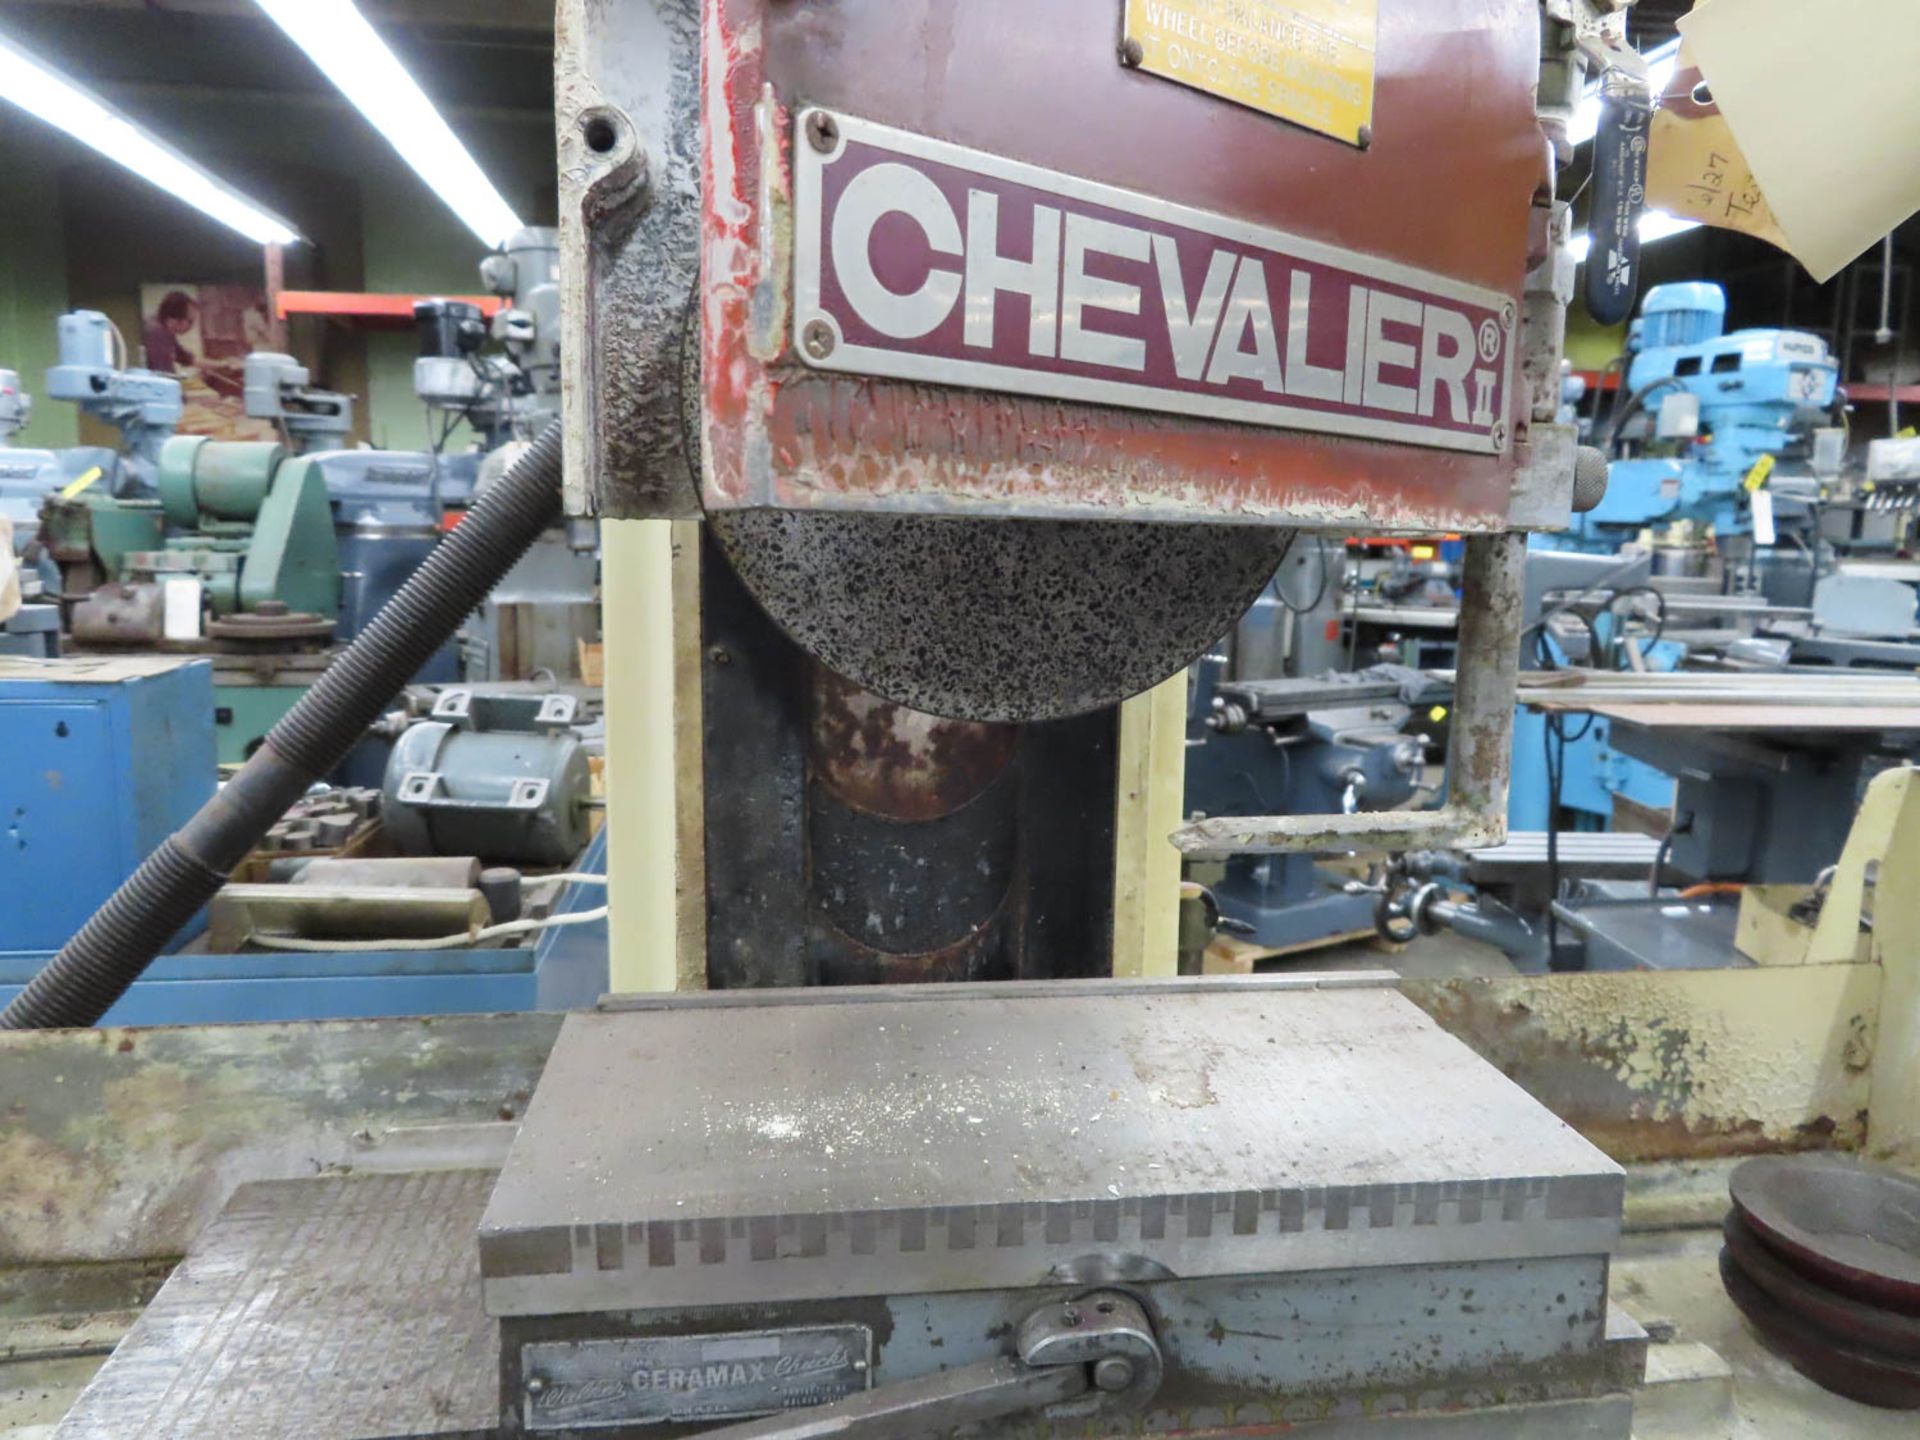 CHEVALIER MDL. FSG-2A618 HYDRAULIC SURFACE GRINDER, 440 V / 3 PH / 60 HZ, TABLE SIZE: 5-3/4" X - Image 3 of 3